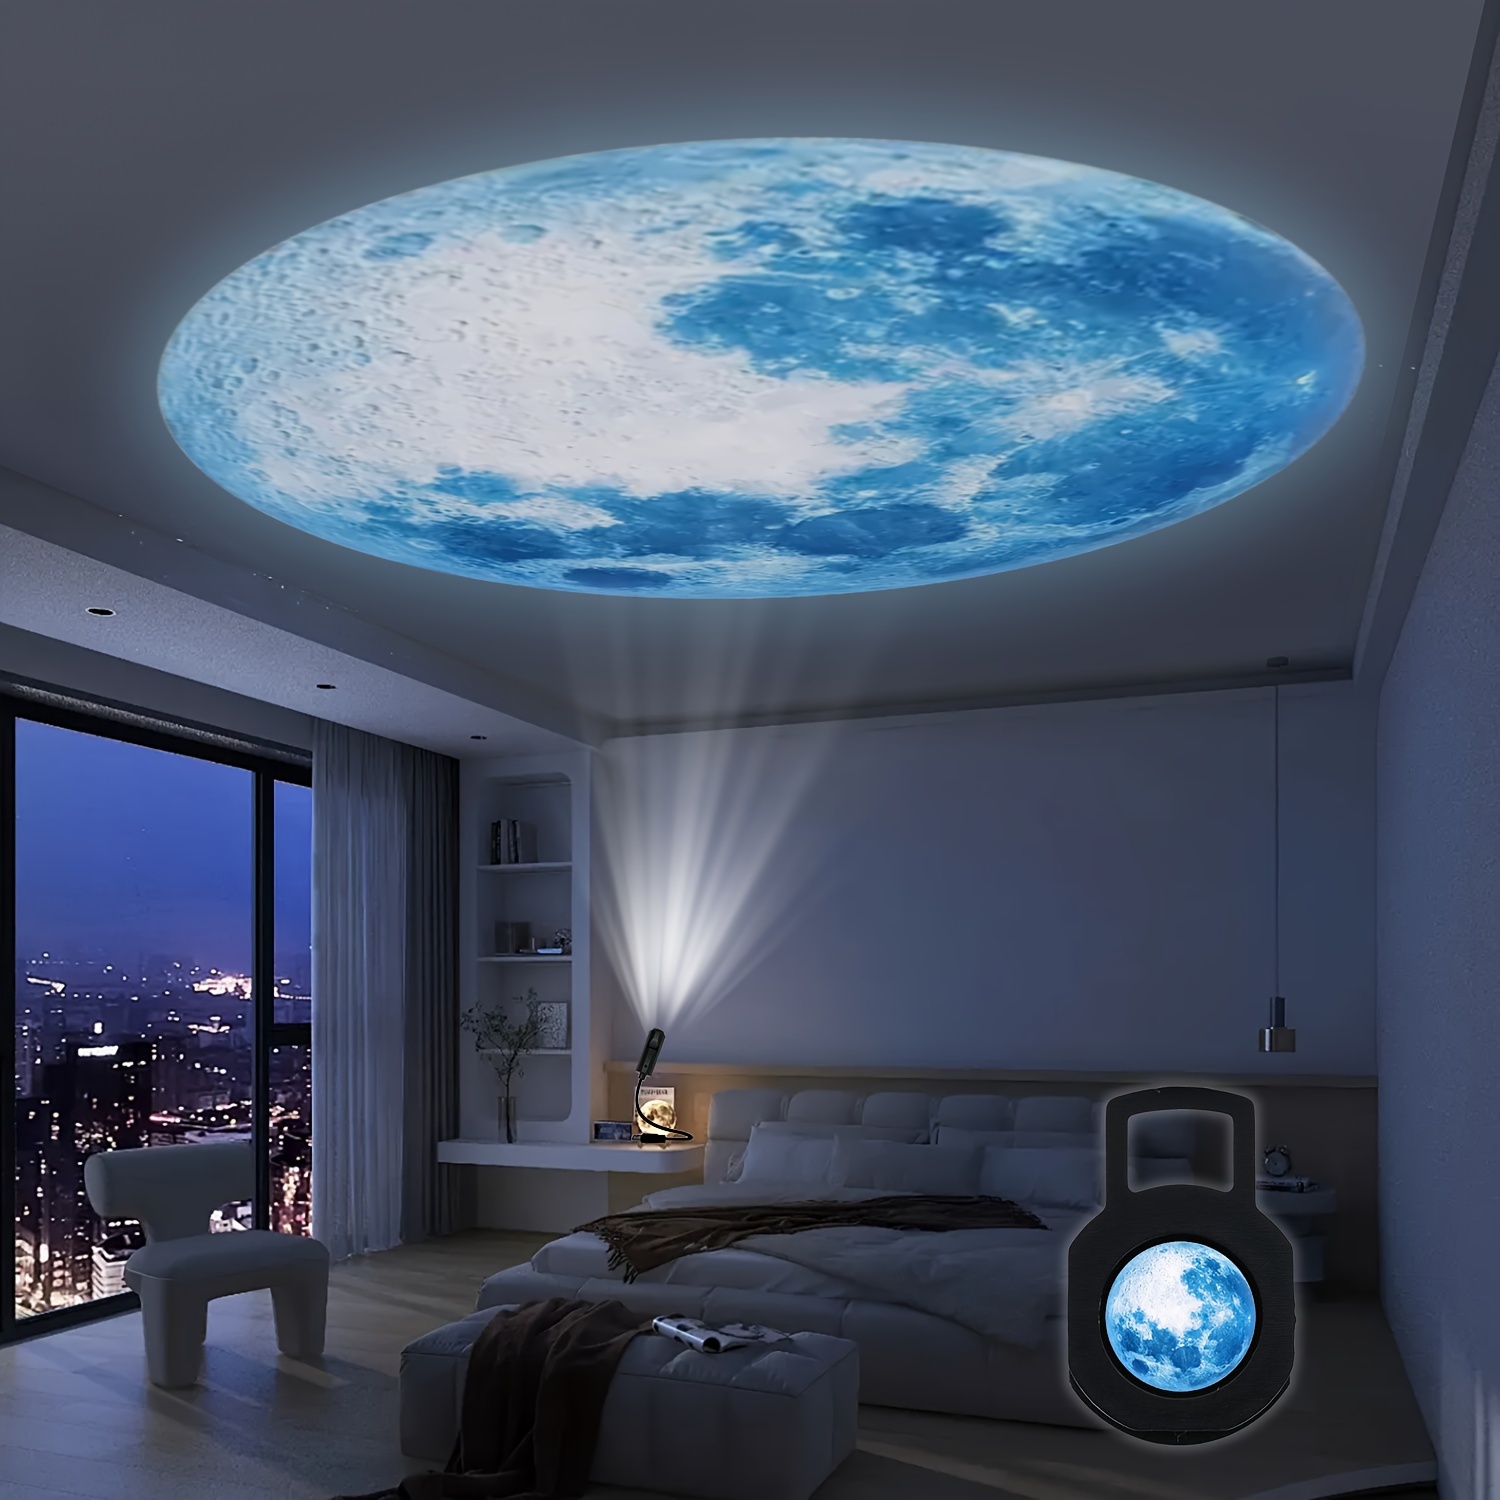 

Blue Moon Globe Projector, 360° Rotatable Adjustable Led Light, Lunar Atmosphere Projection Lamp, Usb Night Light For Home Decor, Bedroom, Living Room, Gift, Room Décor, Wall And Ceiling Embellishment